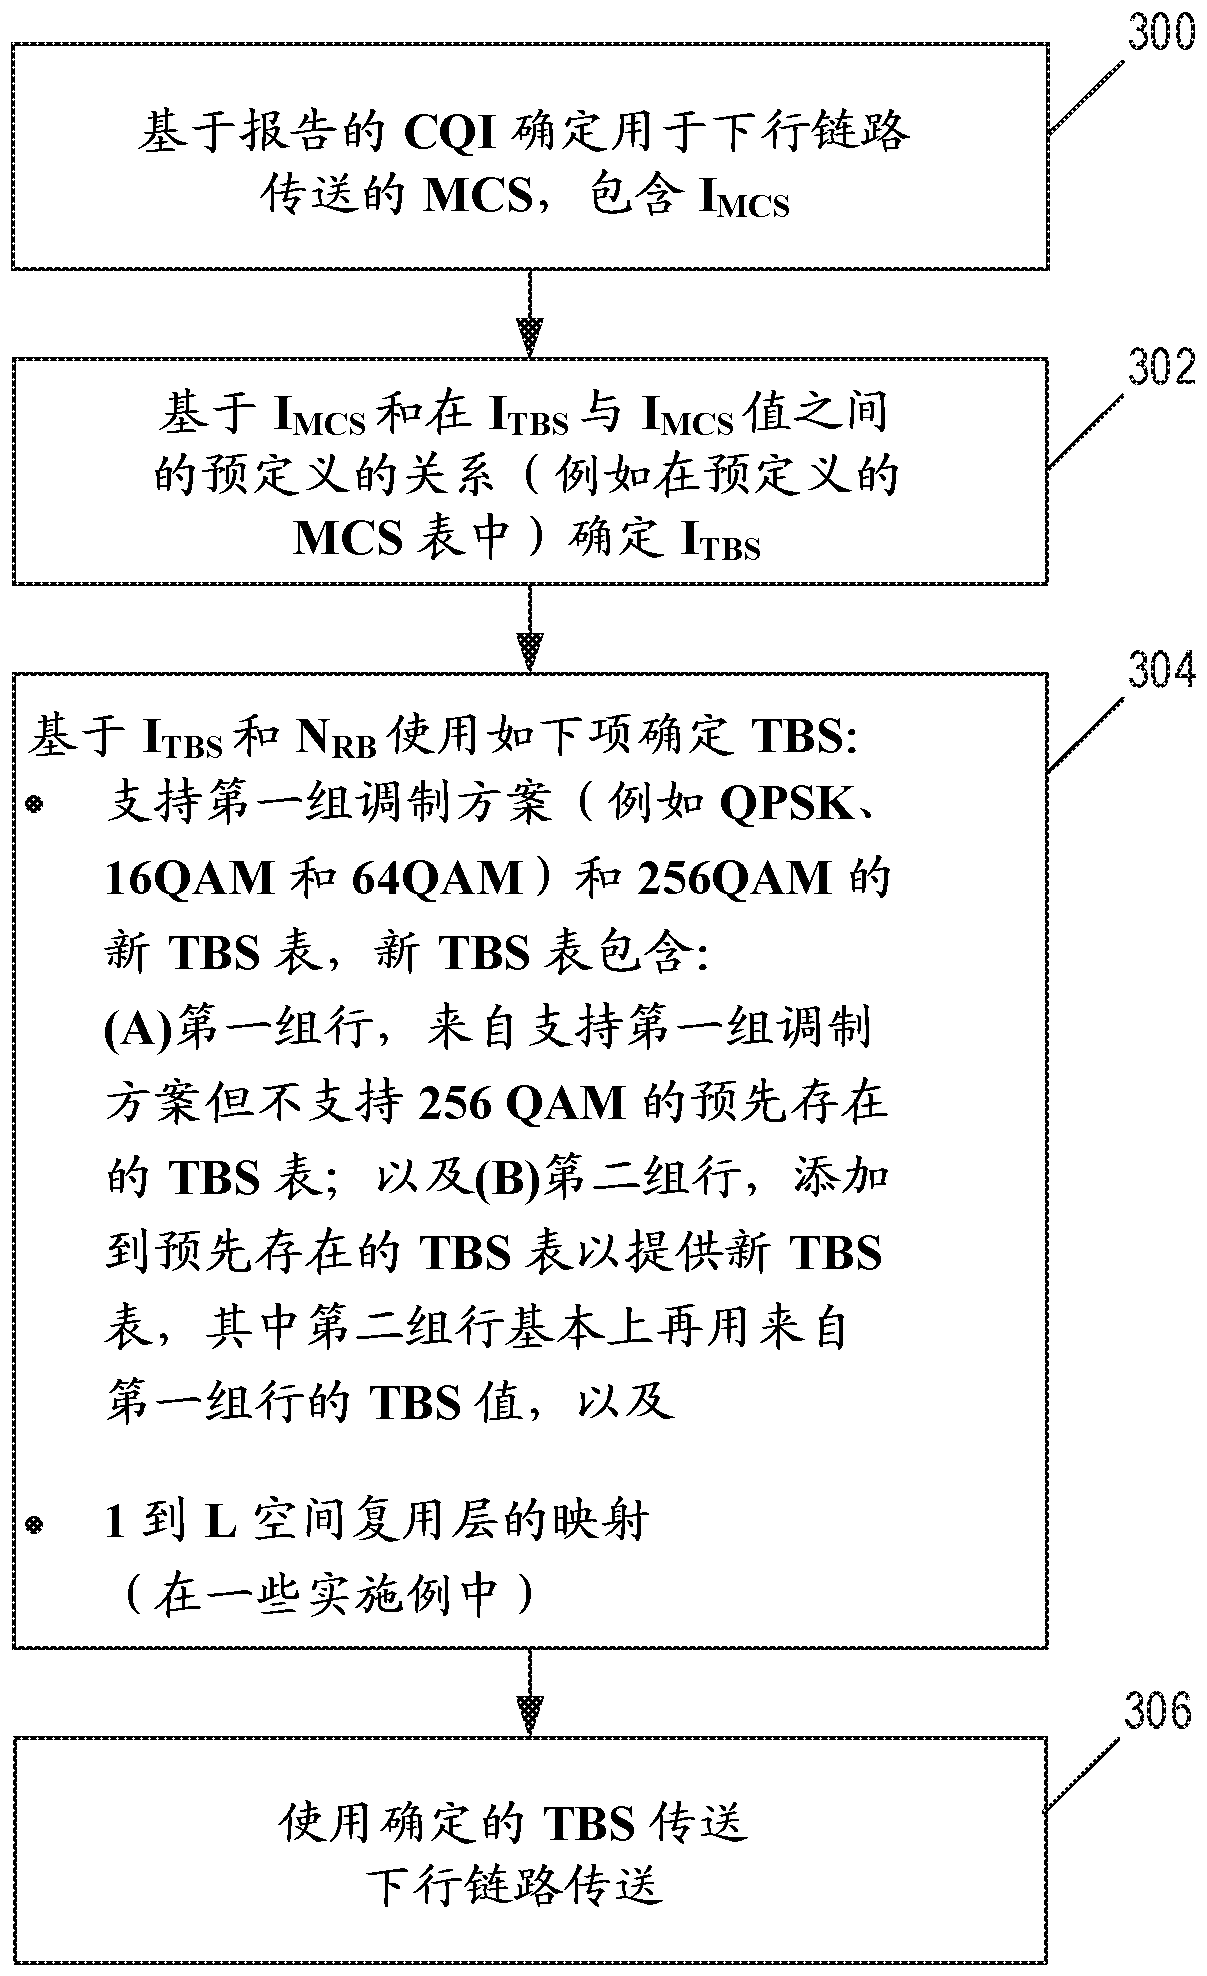 Systems and methods utilizing an efficient TBS table design for 256QAM in a cellular communications network